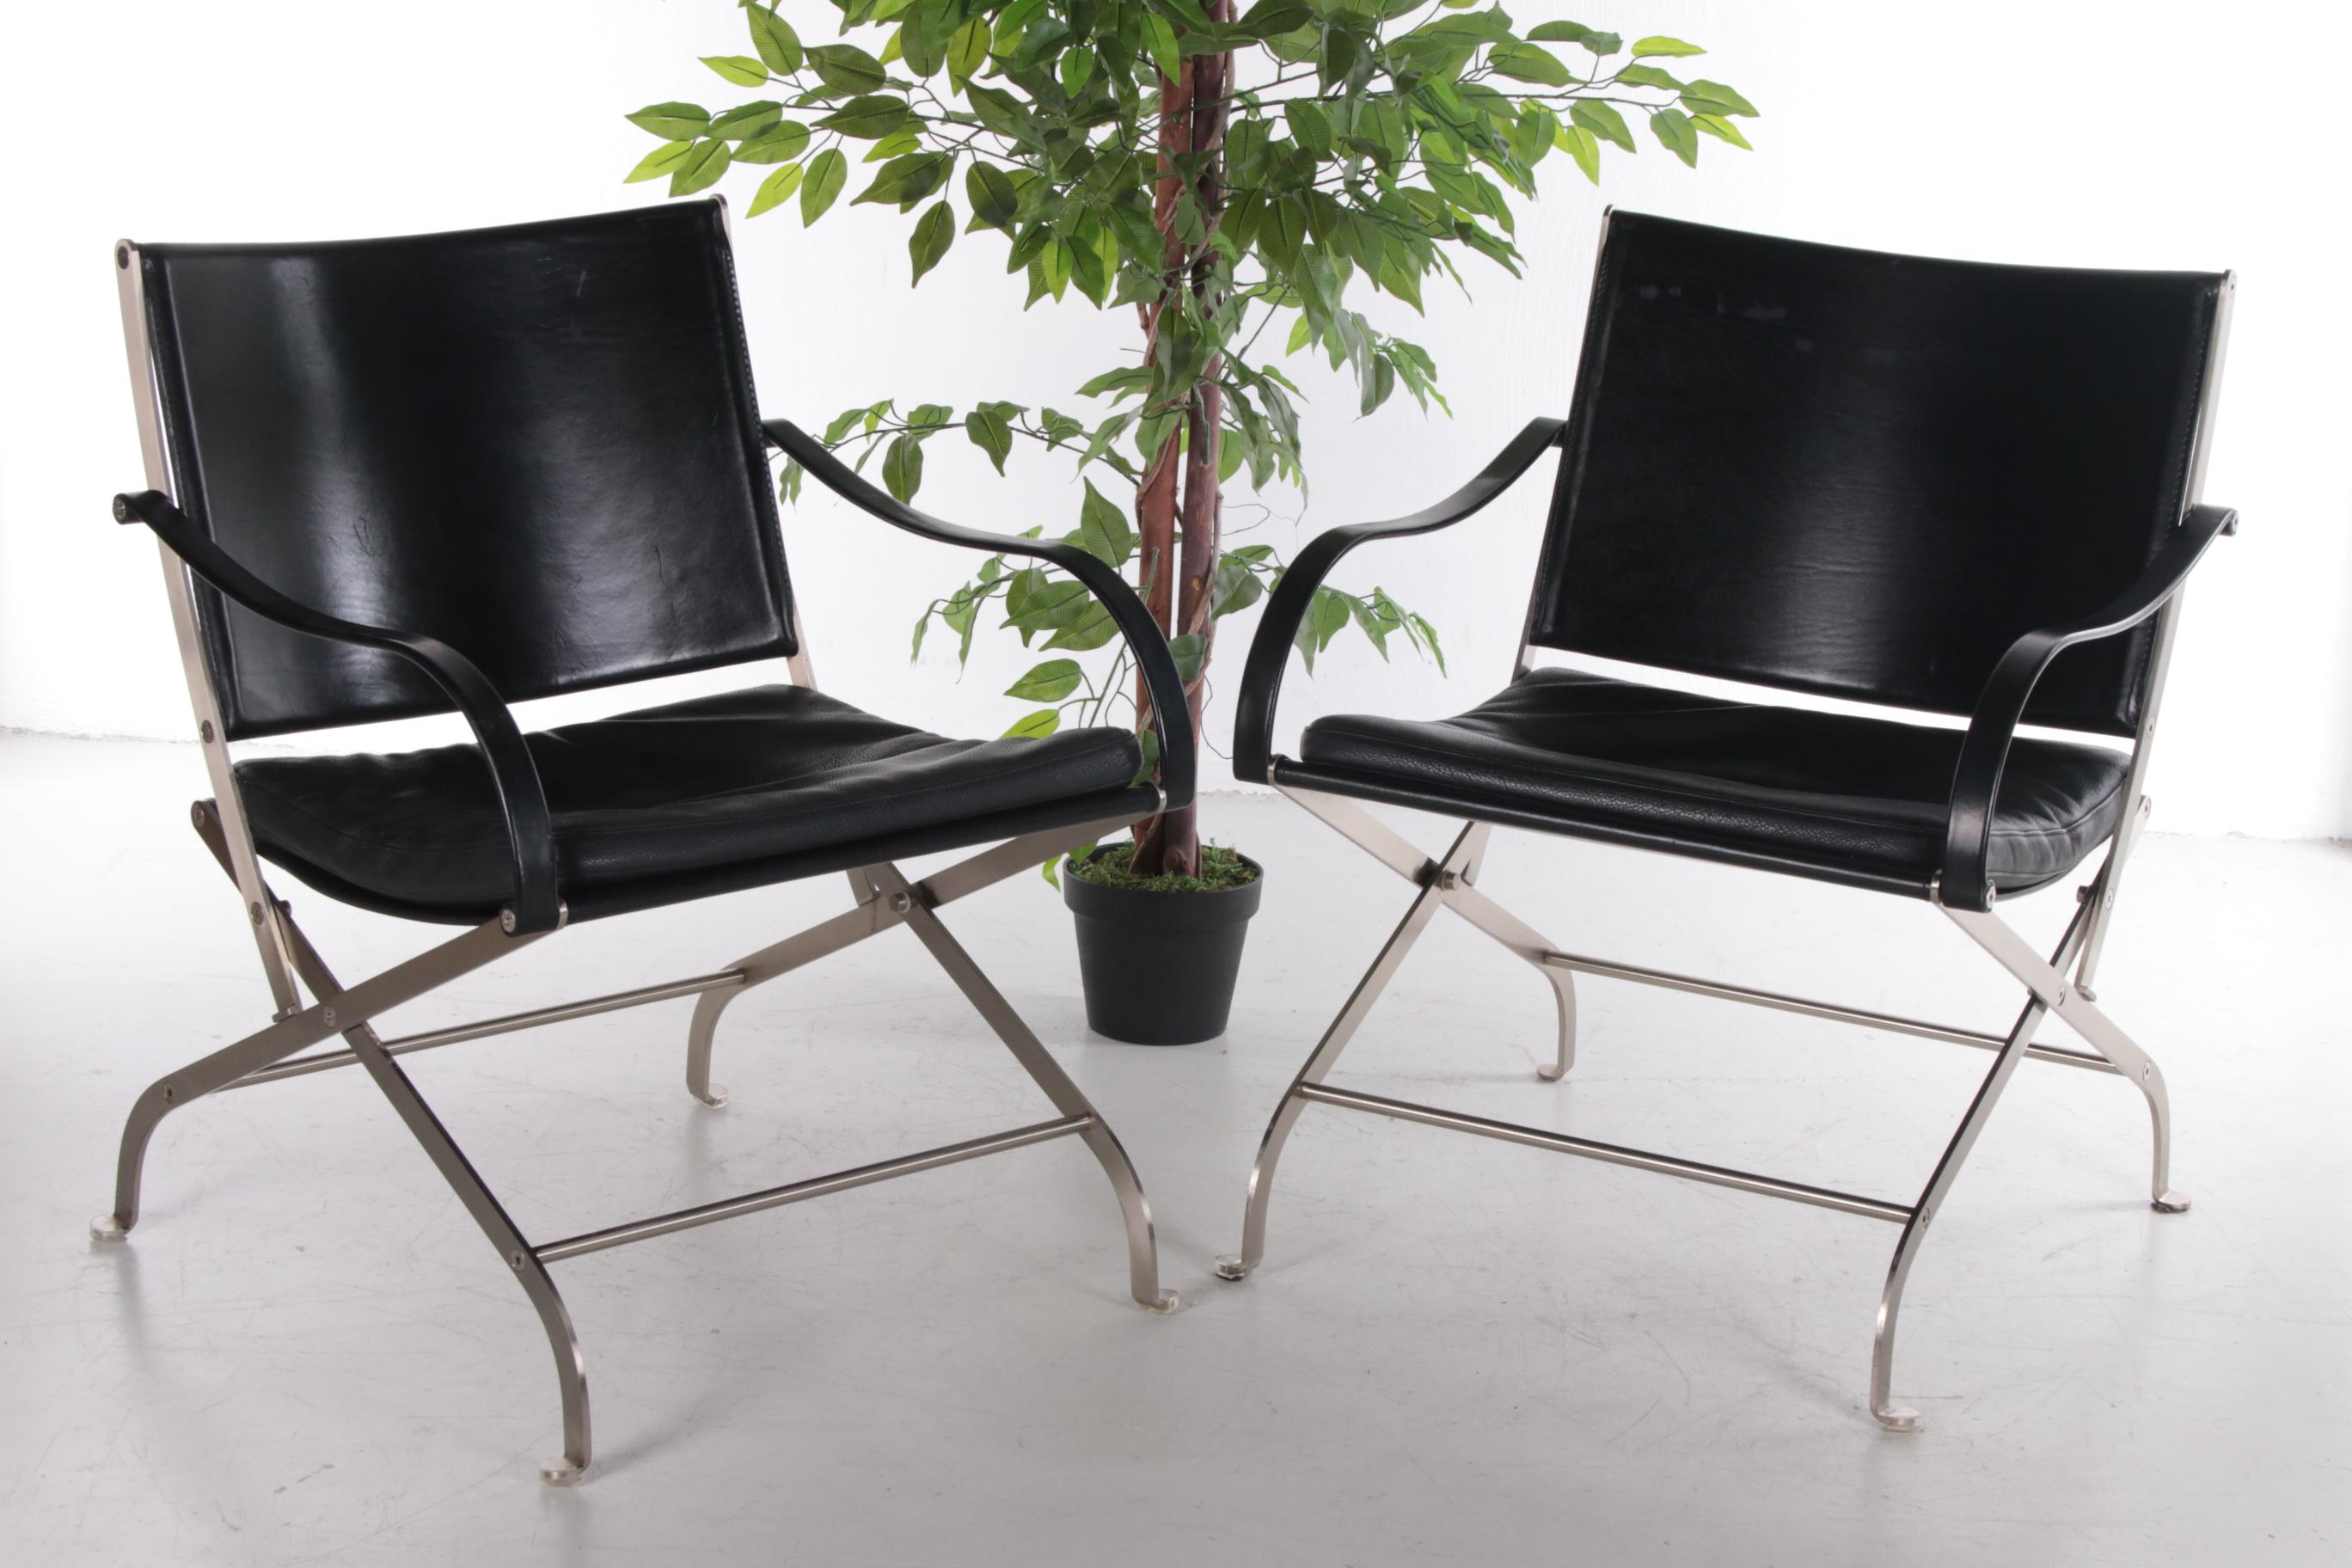 A beautiful set of two black leather Carlotta chairs from the 90s. The chairs were designed by the Italian designer Antonio Citterio for the company Flexform.

The chairs have a beautiful modern design due to the combination of metal and leather,